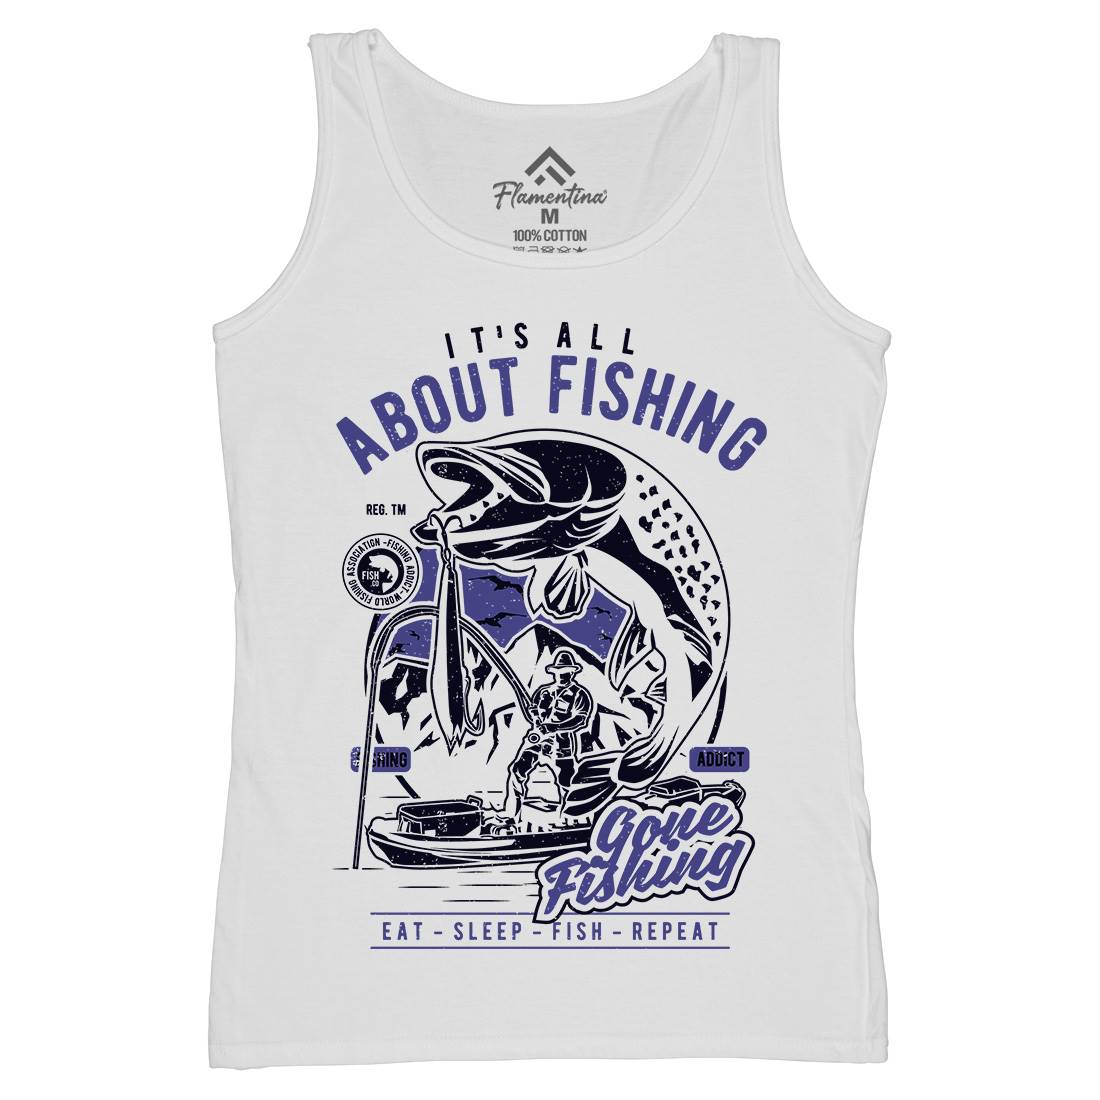 All About Womens Organic Tank Top Vest Fishing A604